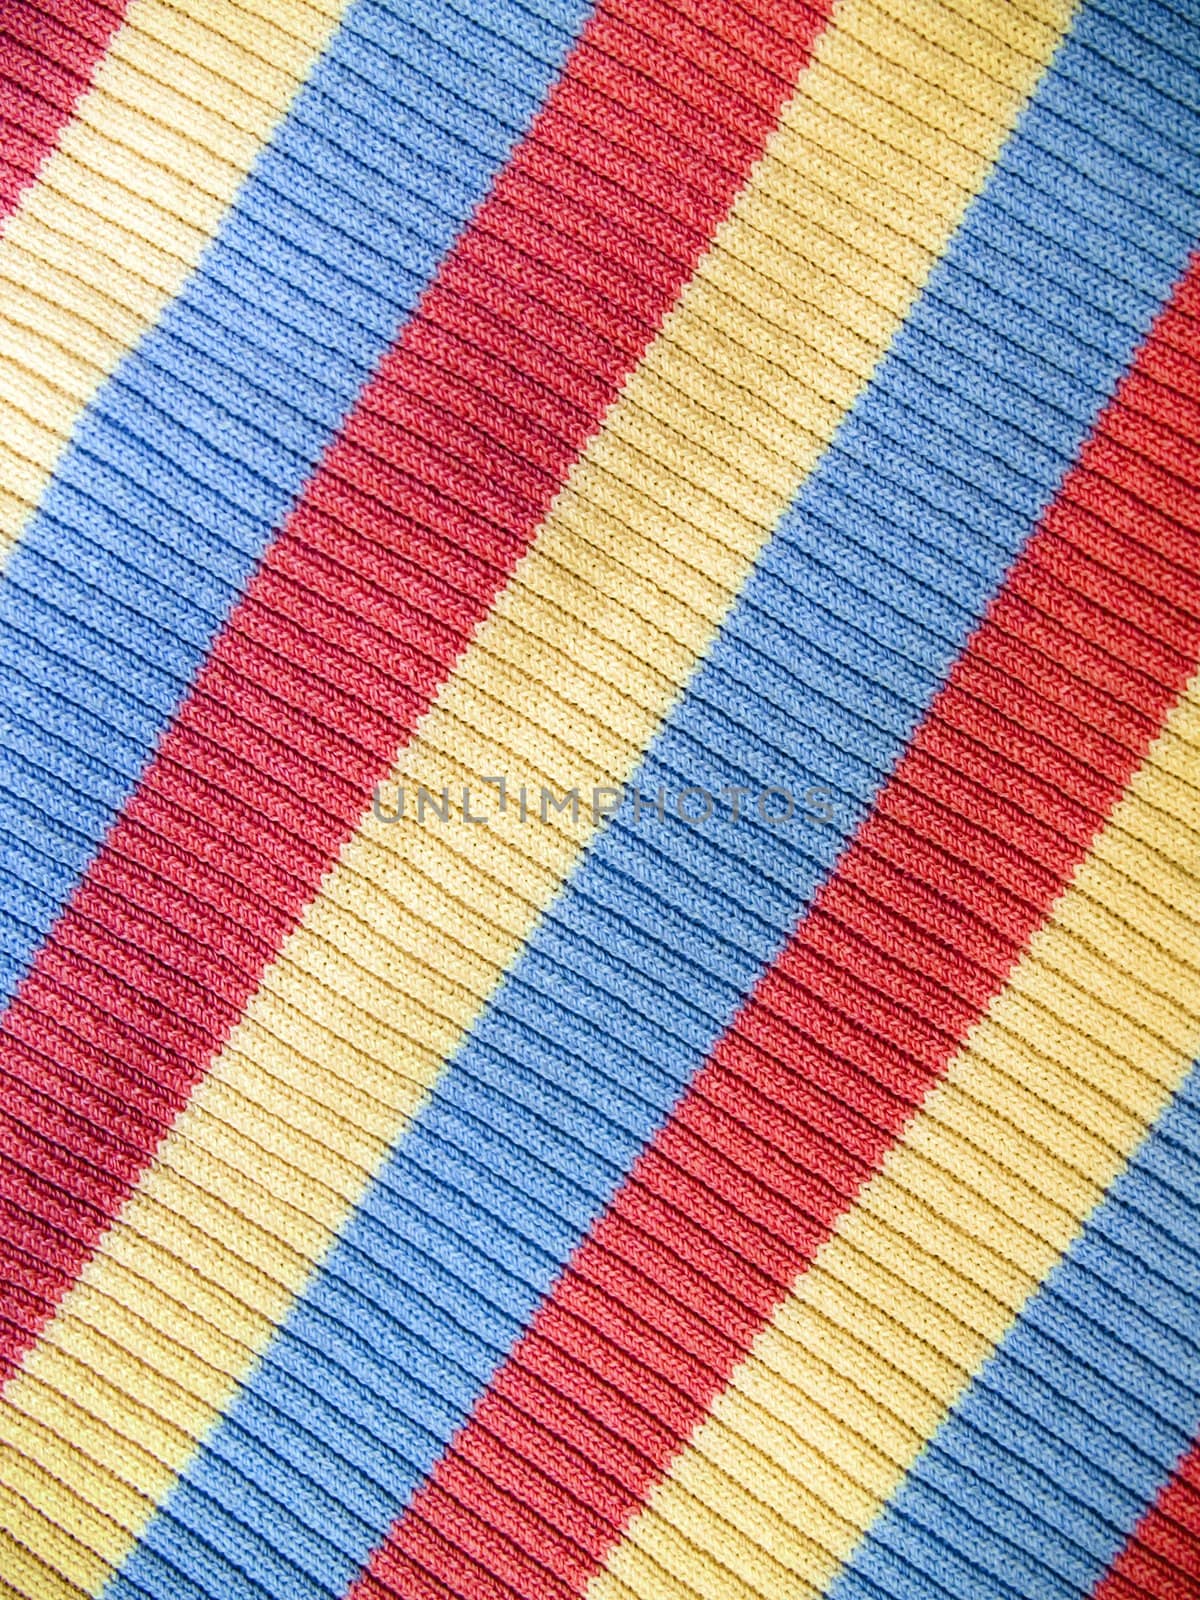 Colorful striped fabric yellow red and blue